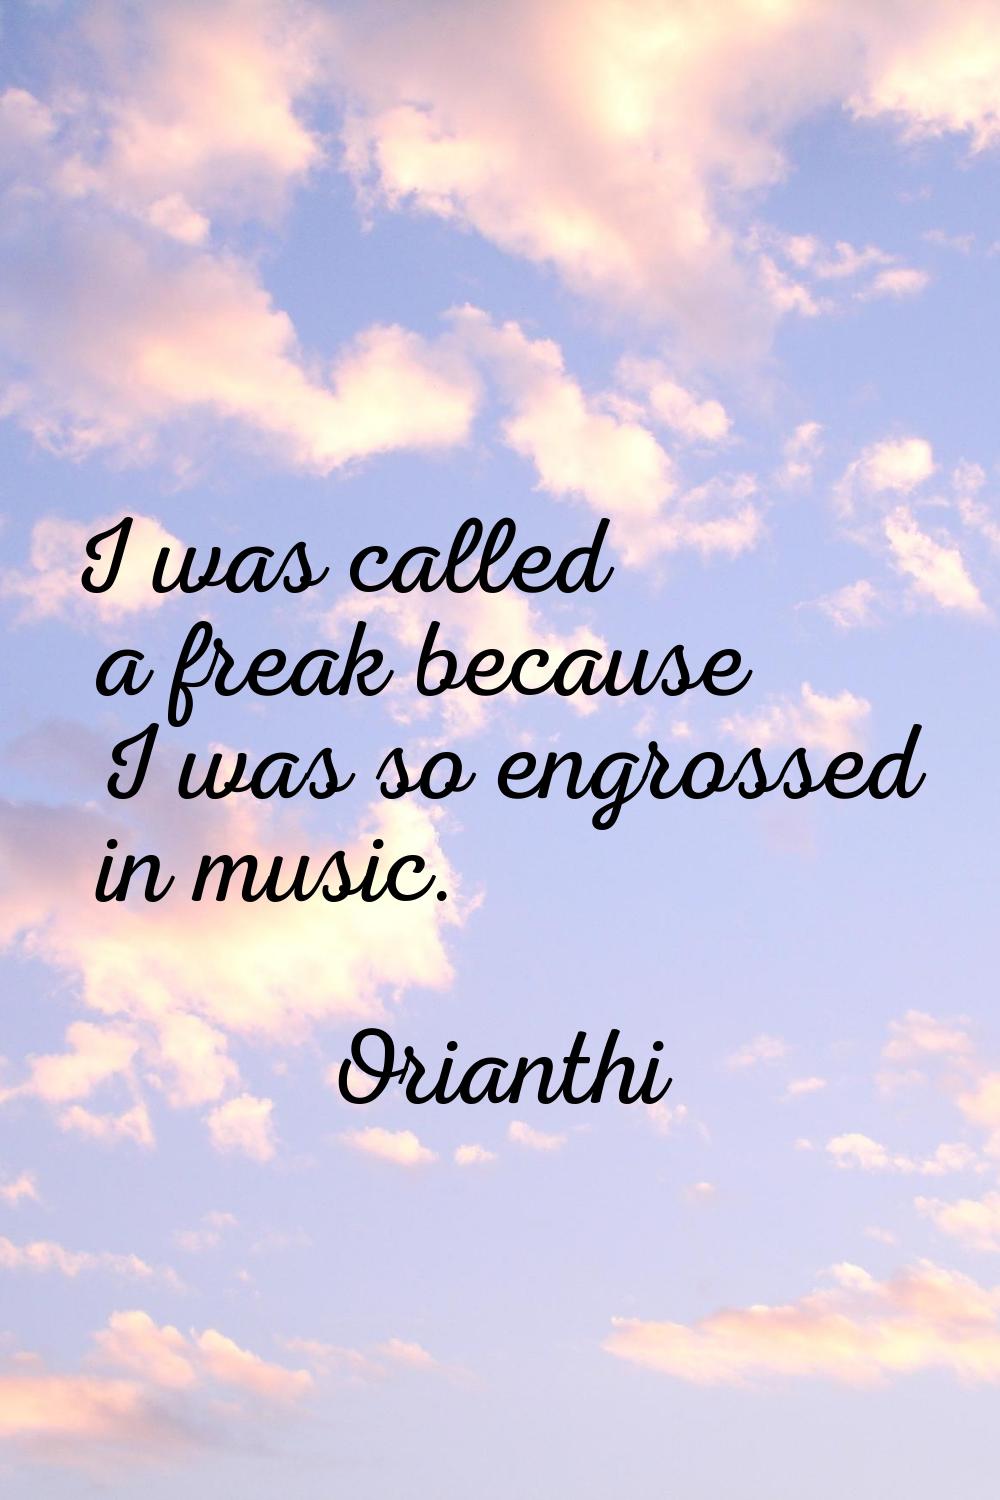 I was called a freak because I was so engrossed in music.